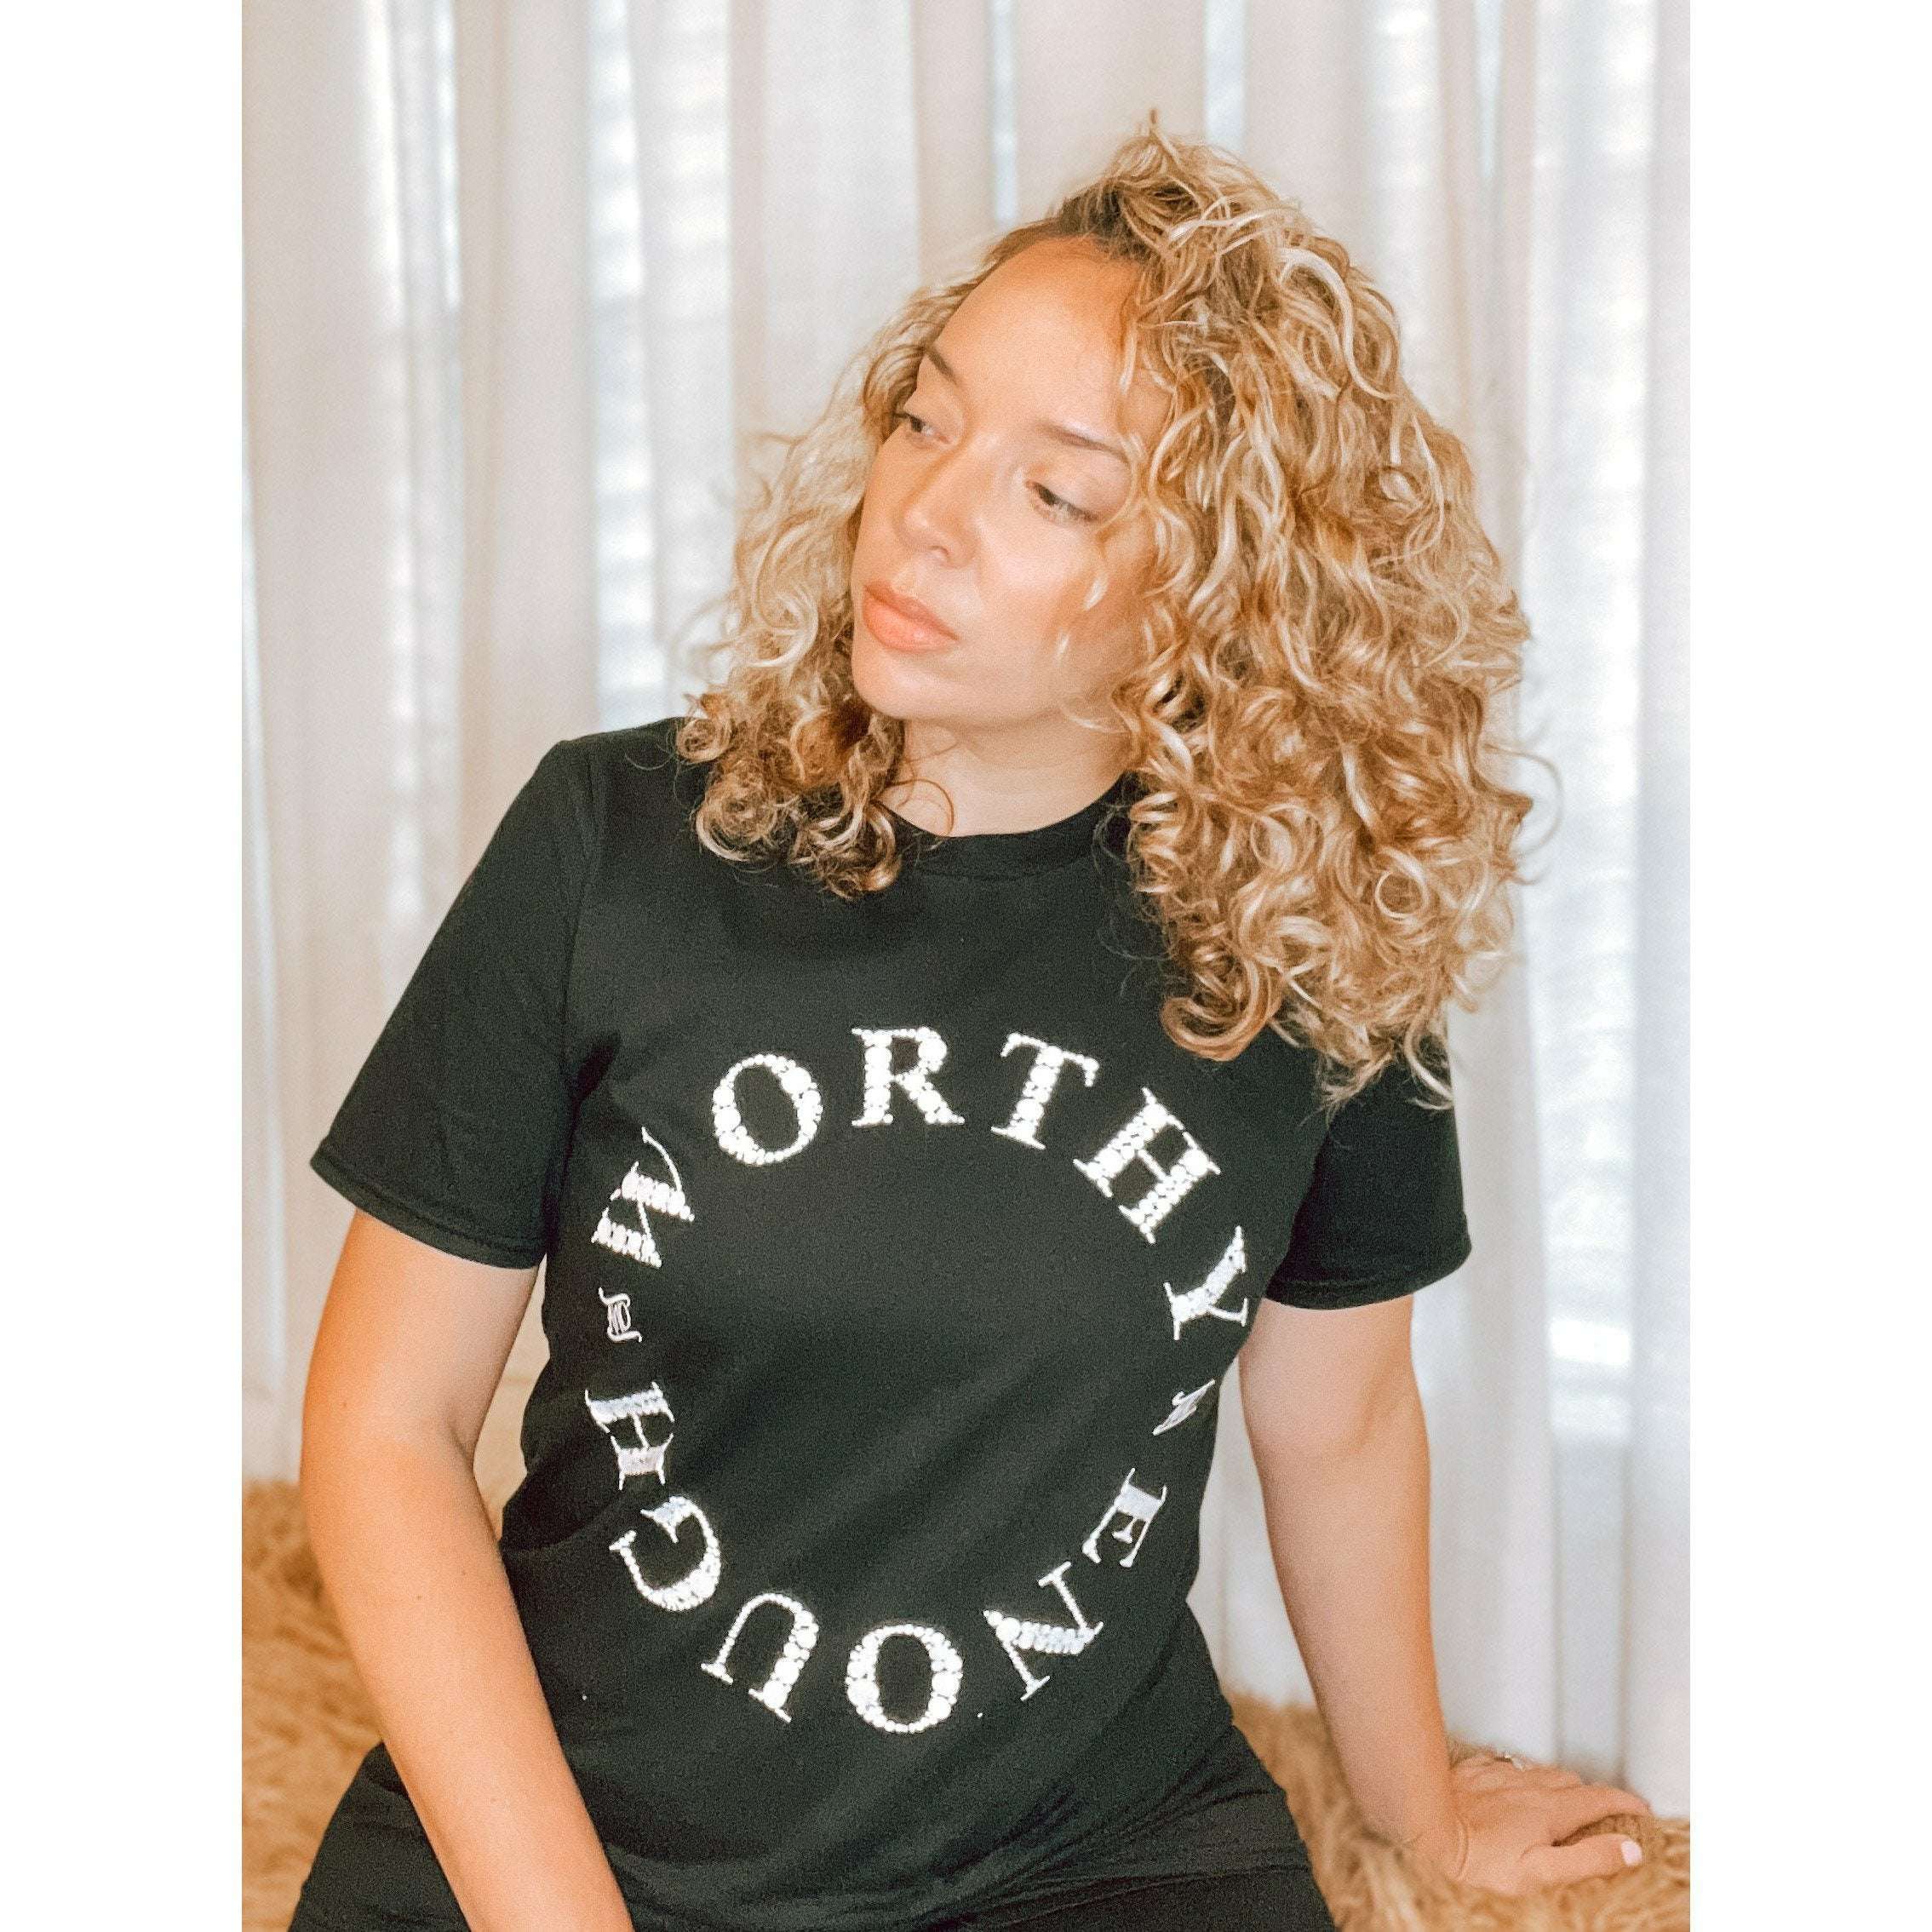 Worthy & Enough Tee - The Hive by Chris Jesselle